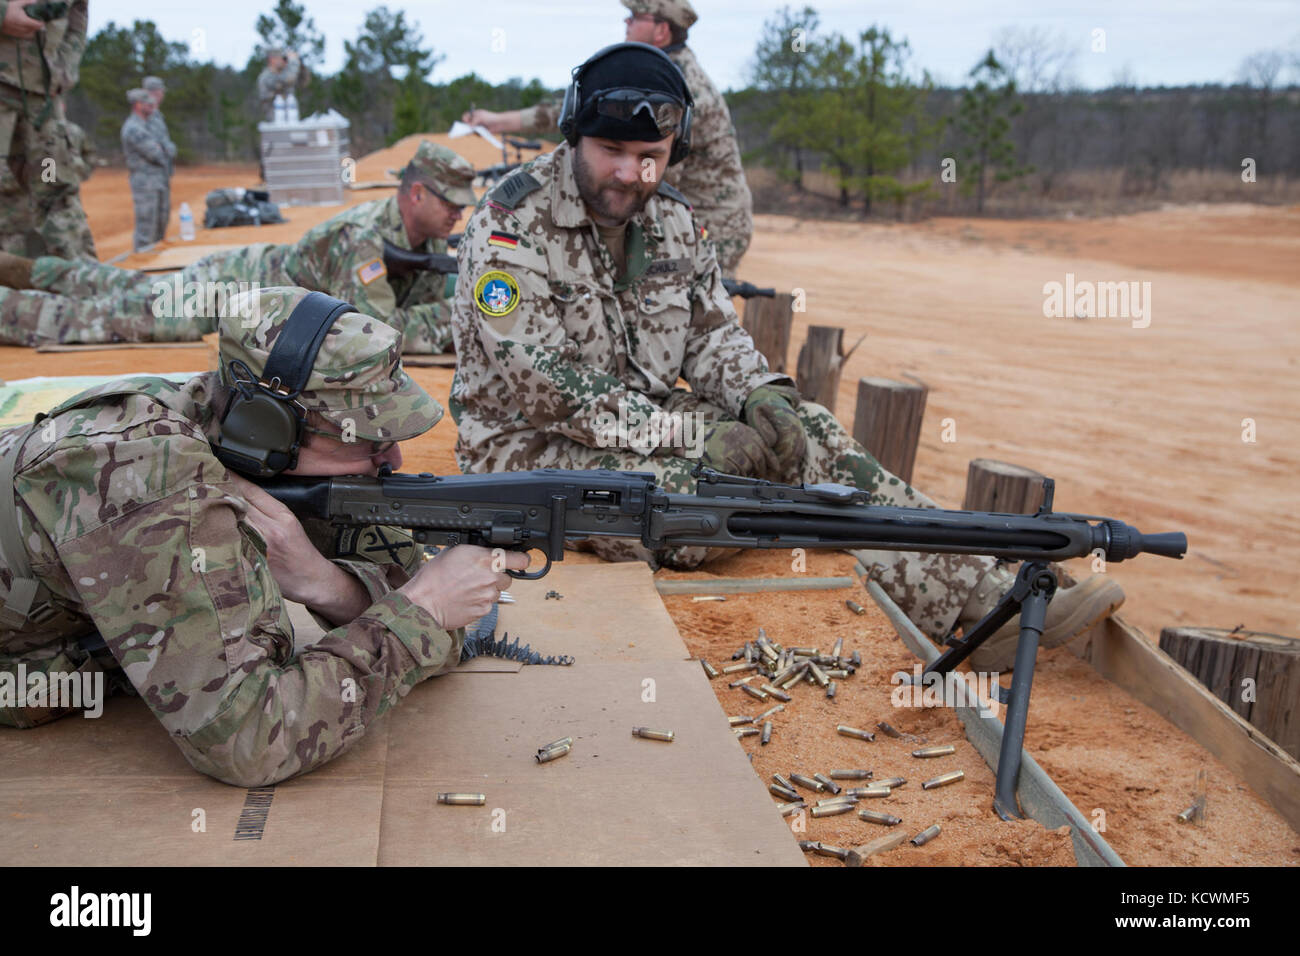 German Armed Forces Spc. Kai Schulz observes South Carolina National Guard Soldiers and Airmen participating in a live-fire German Proficiency Marksmanship Badge qualification at Fort Jackson, South Carolina with the assistance of Soldiers from the German Armed Forces Command, Mar. 8, 2017. The South Carolina National Guard service members utilized the German MG 3 machine gun, P8 pistol, and G36 assault rifle during the event. (U.S. Army National Guard photo by Capt. Brian Hare) Stock Photo